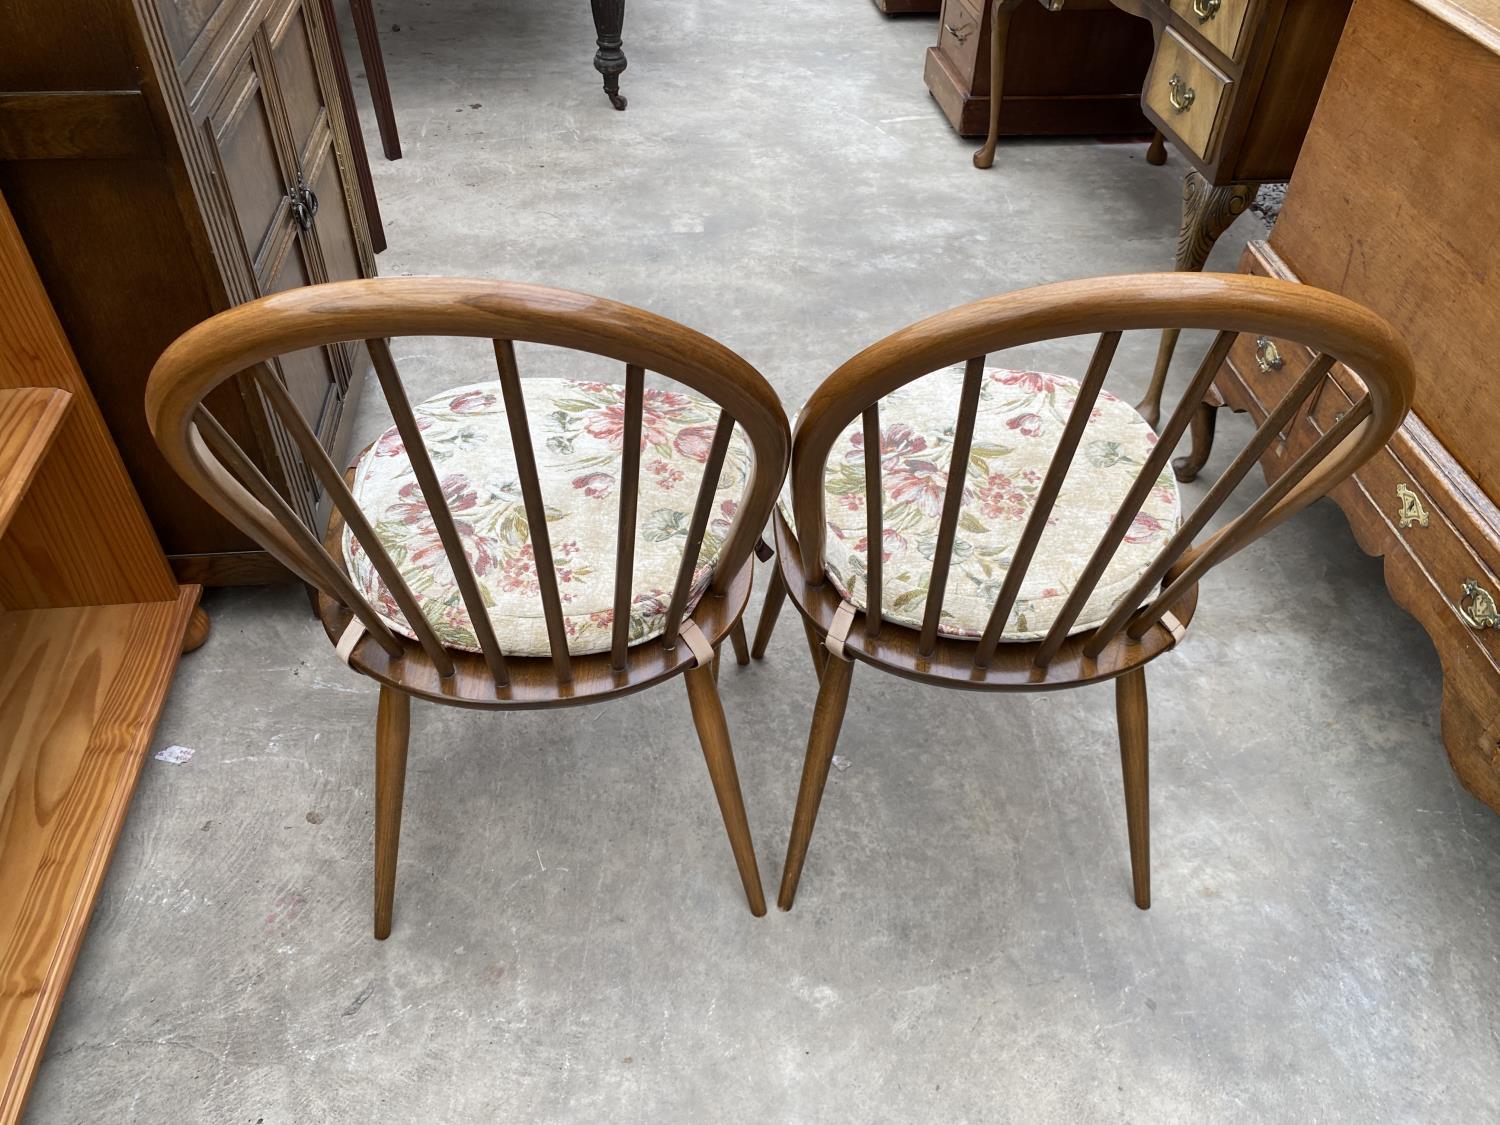 A PAIR OF ERCOL ELM AND BEECH WINDSOR STYLE DINING CHAIRS - Image 5 of 6